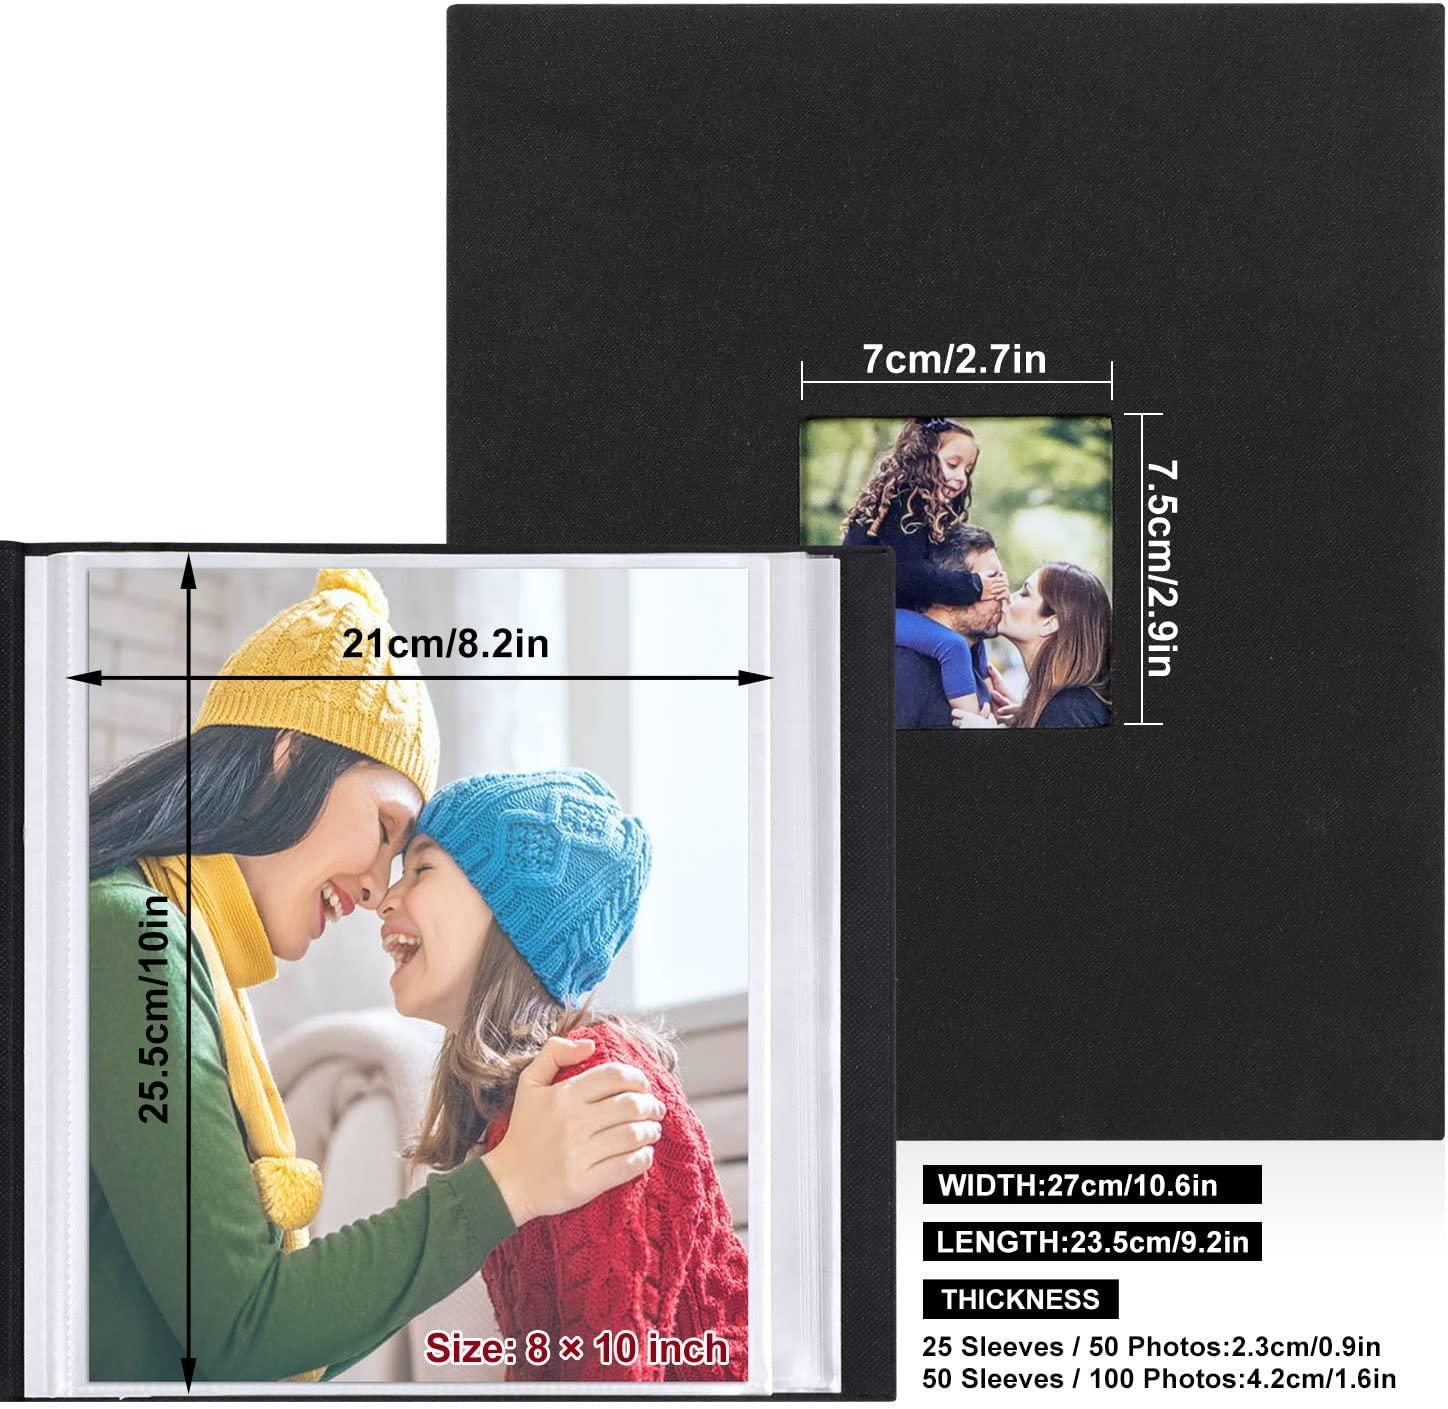 Lanpn Photo Album 9x12, Linen Hard Cover Acid Free Slip Slide in Photo  Albums Sleeves Holds 50 Top Load Vertical Only 9x12 Pictures (Blue)